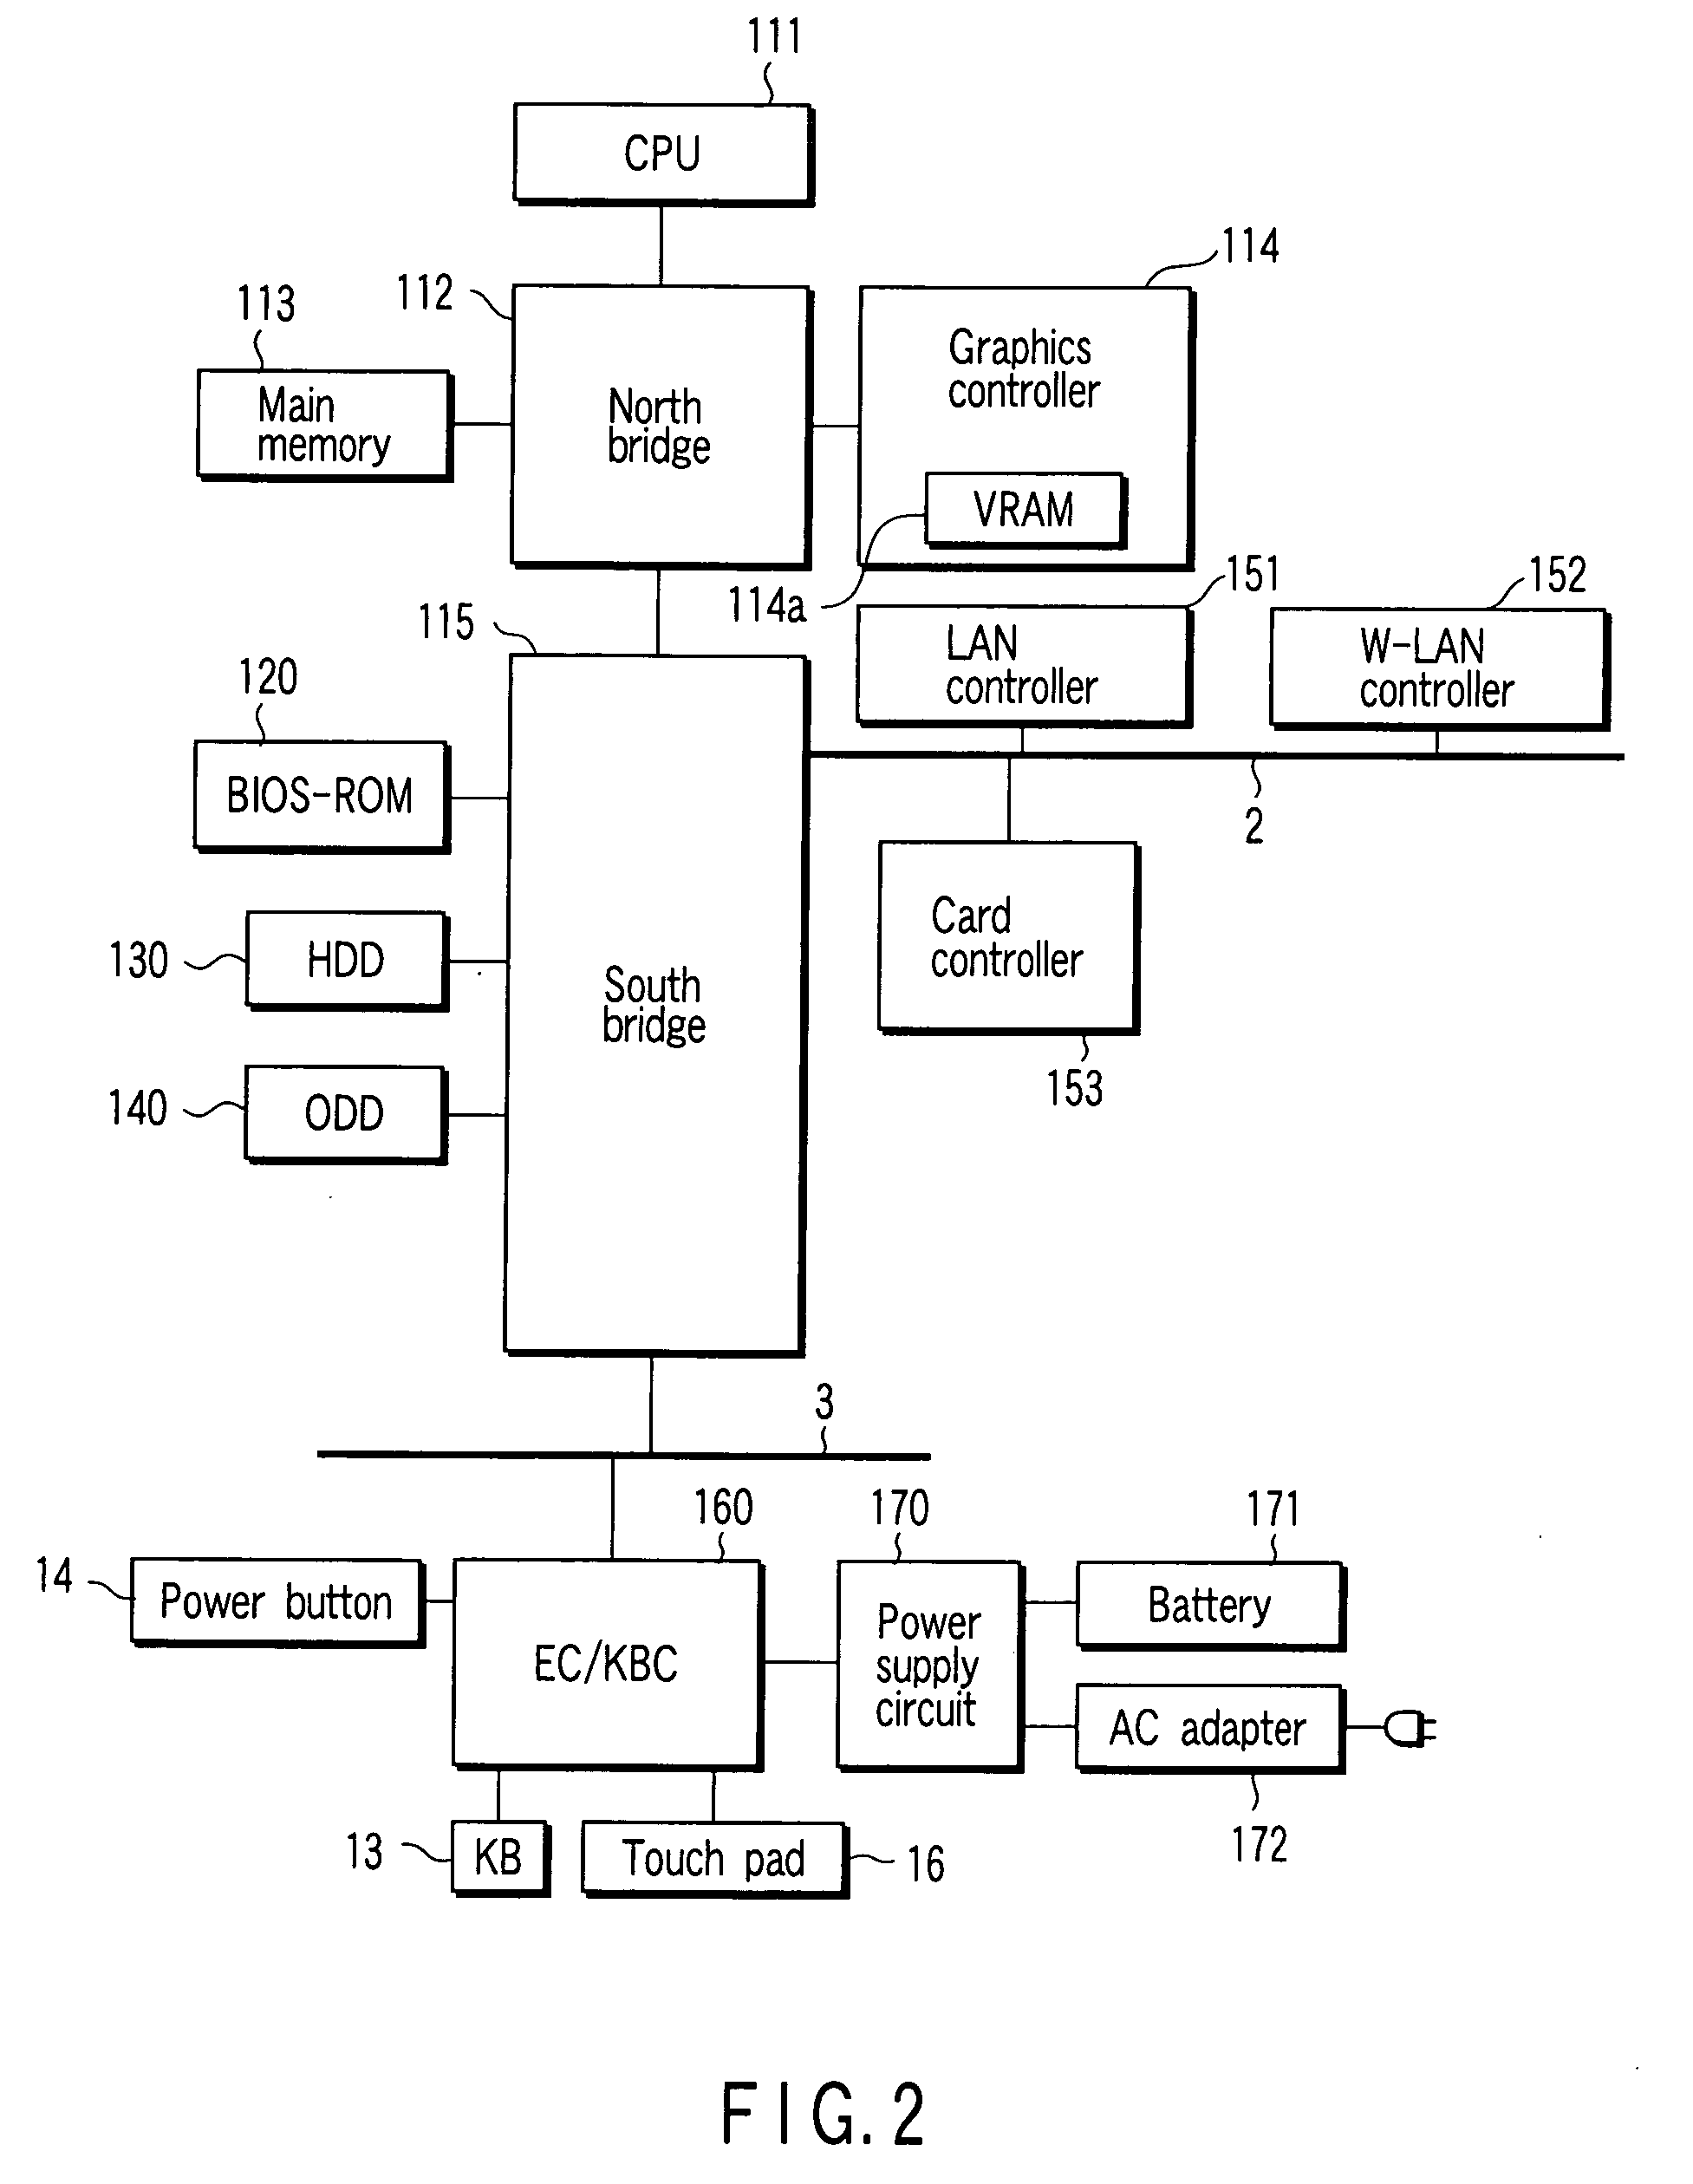 Electronic device with auxiliary unit that is usable detached from main unit of electronic device